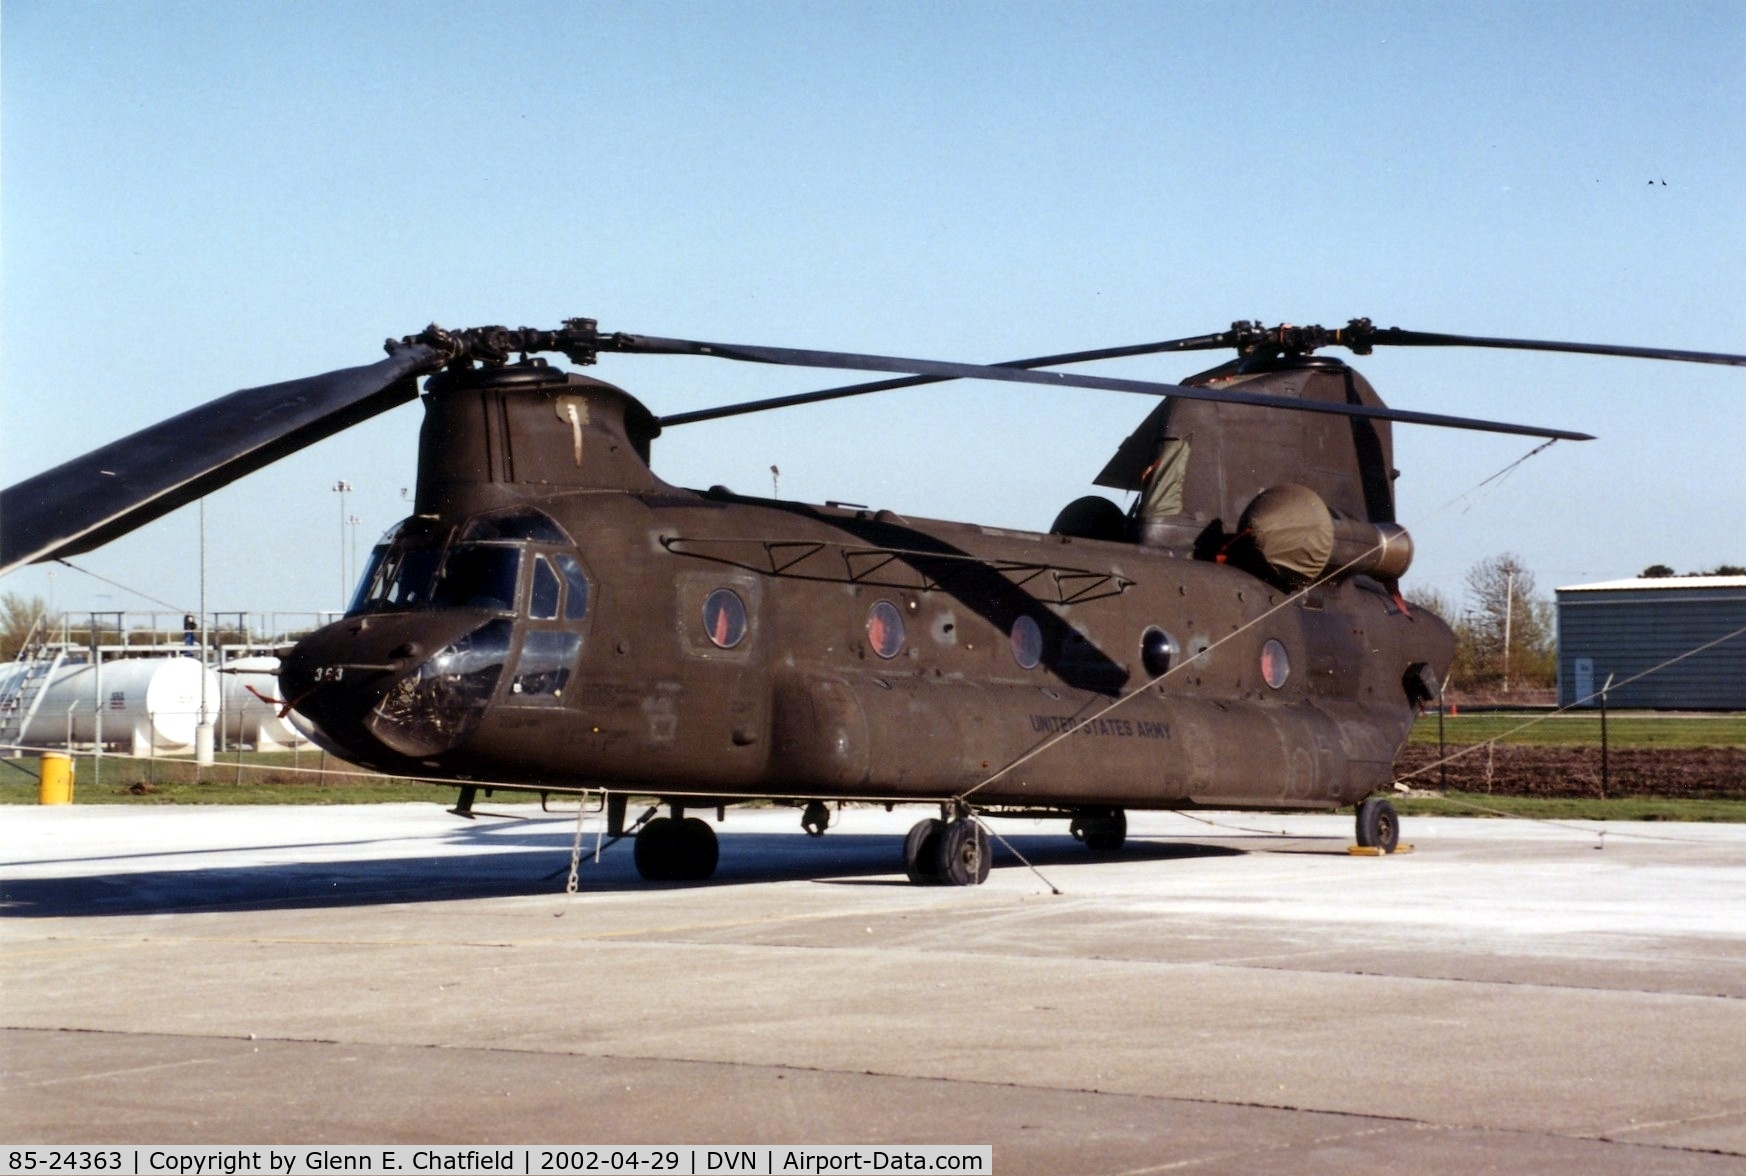 85-24363, 1985 Boeing CH-47D Chinook C/N M.3133, CH-47D at the Davenport Iowa Army National Guard